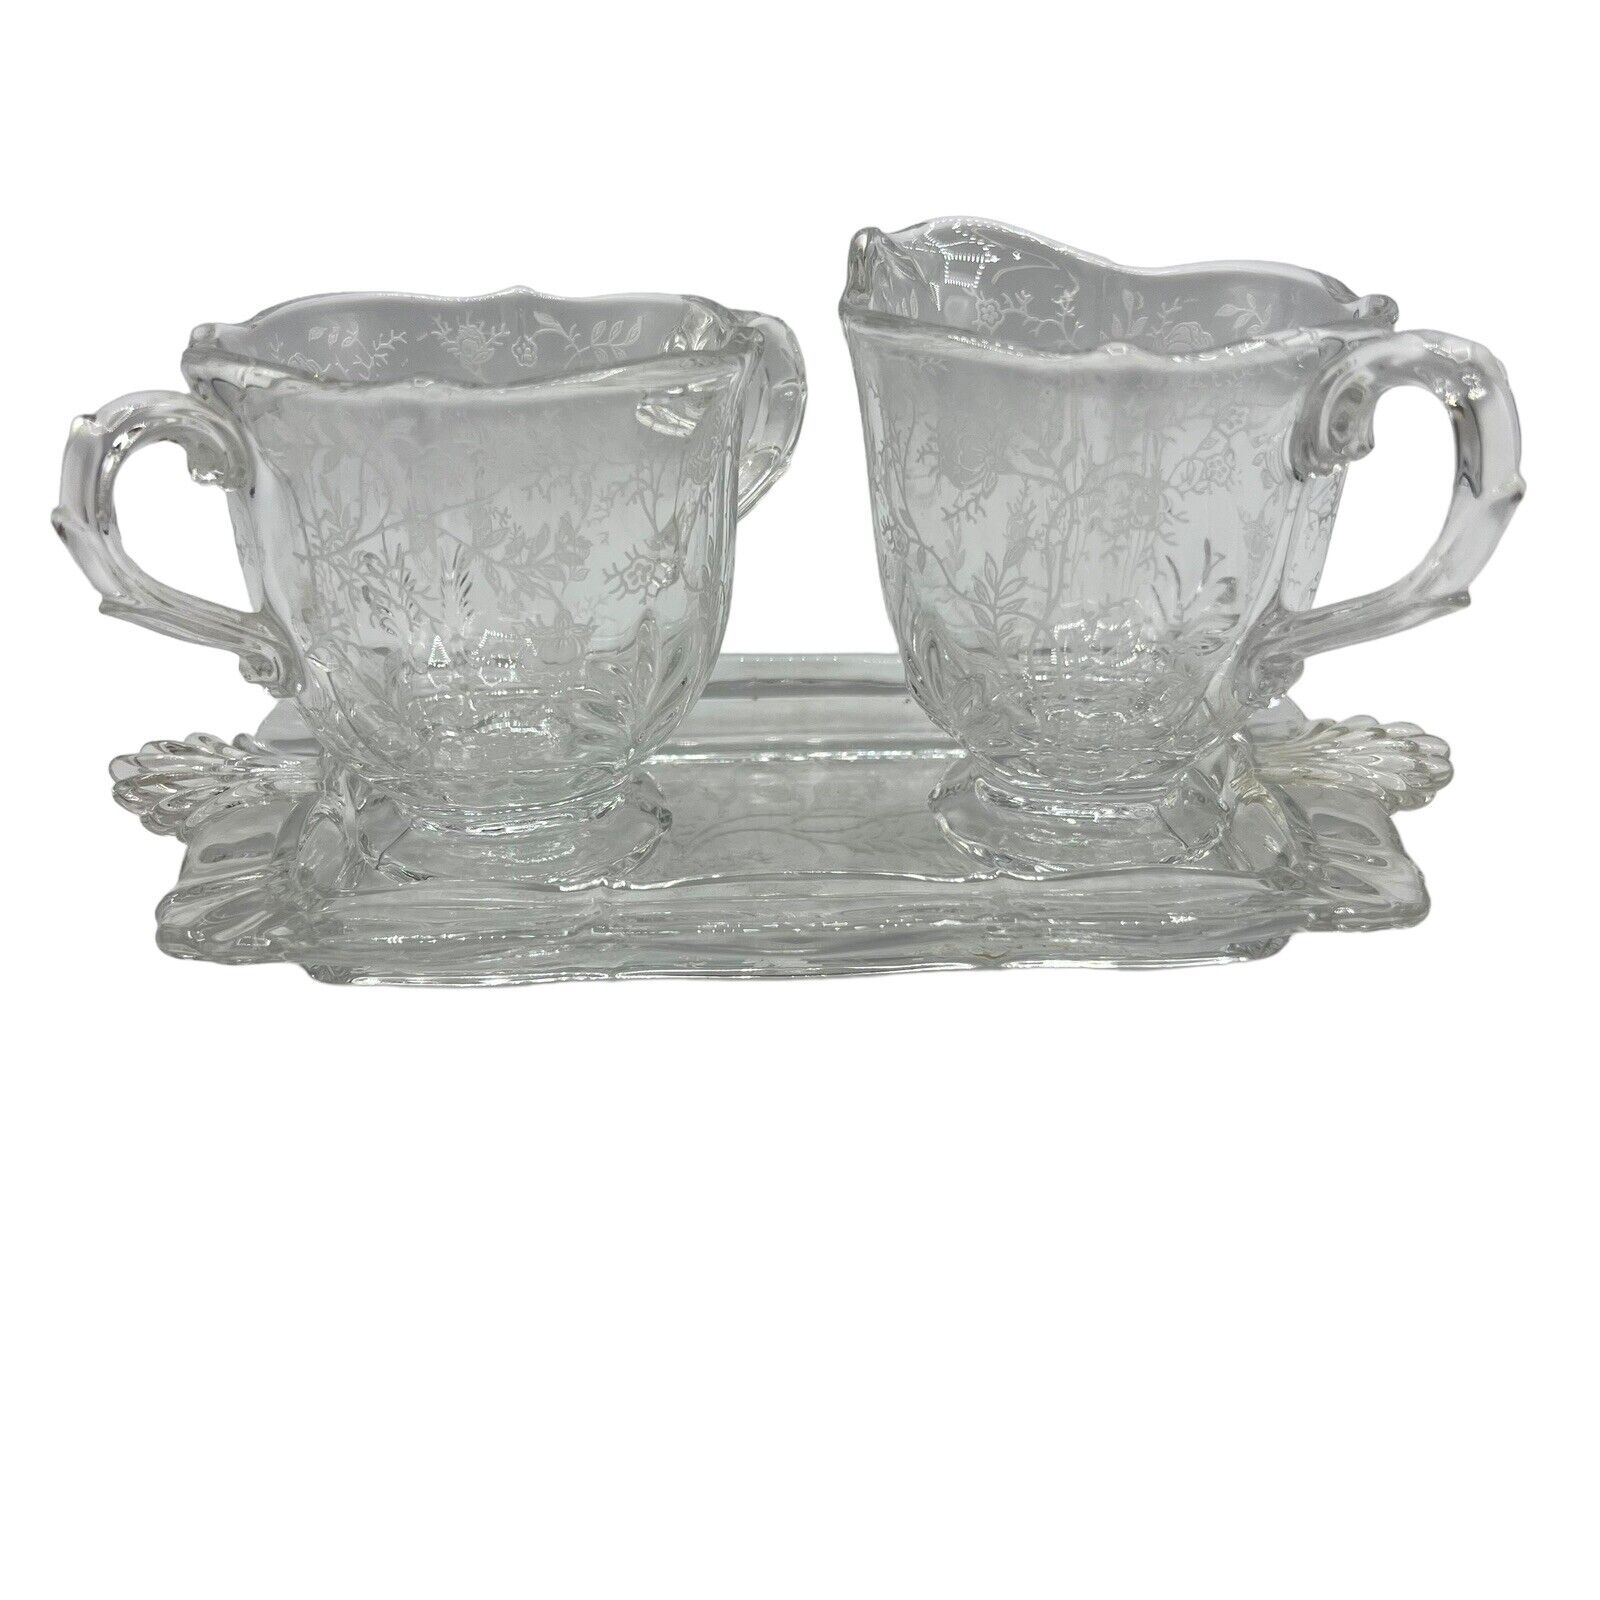 Fostoria Baroque Chintz Etched Rose Footed Glass Sugar and Creamer & Tray Set